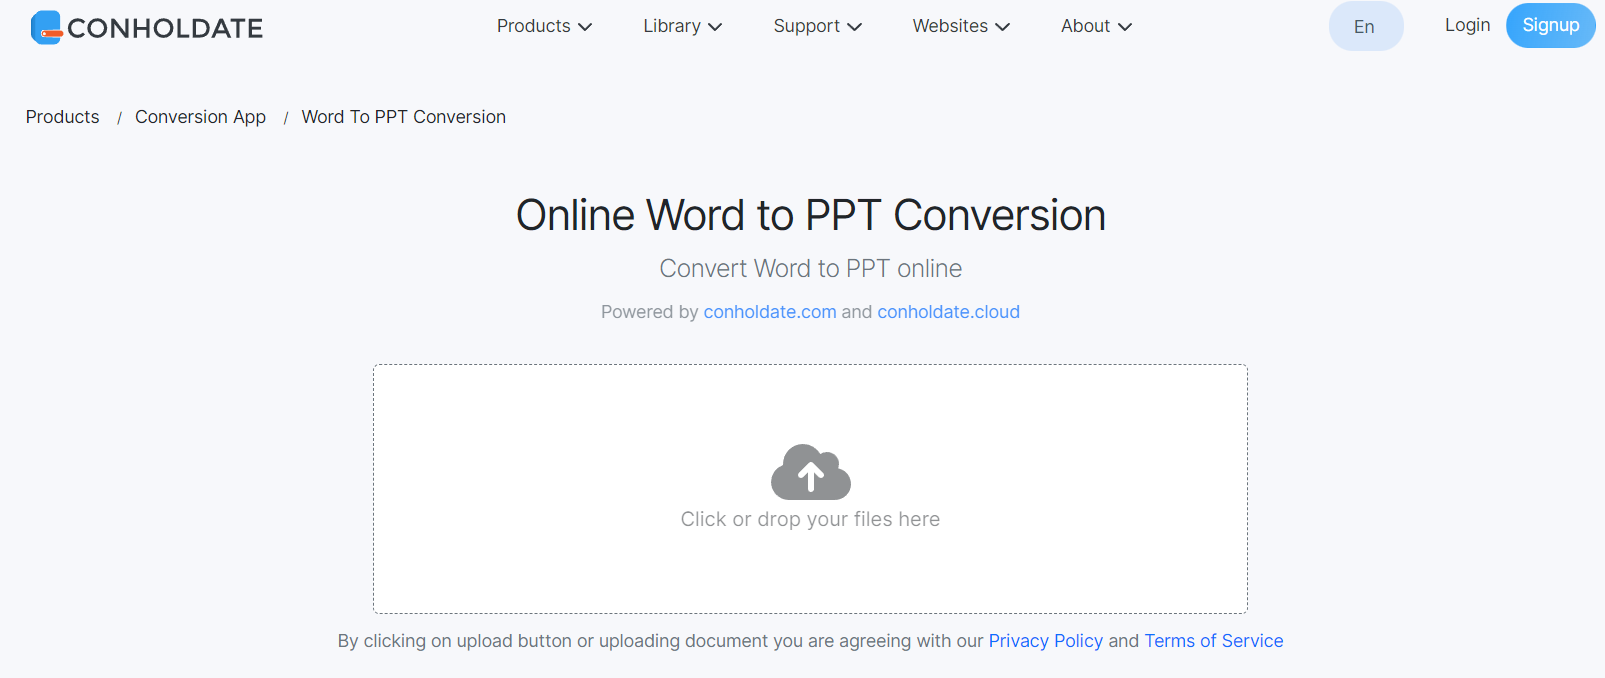 Conholdate Word to PPT Conversion